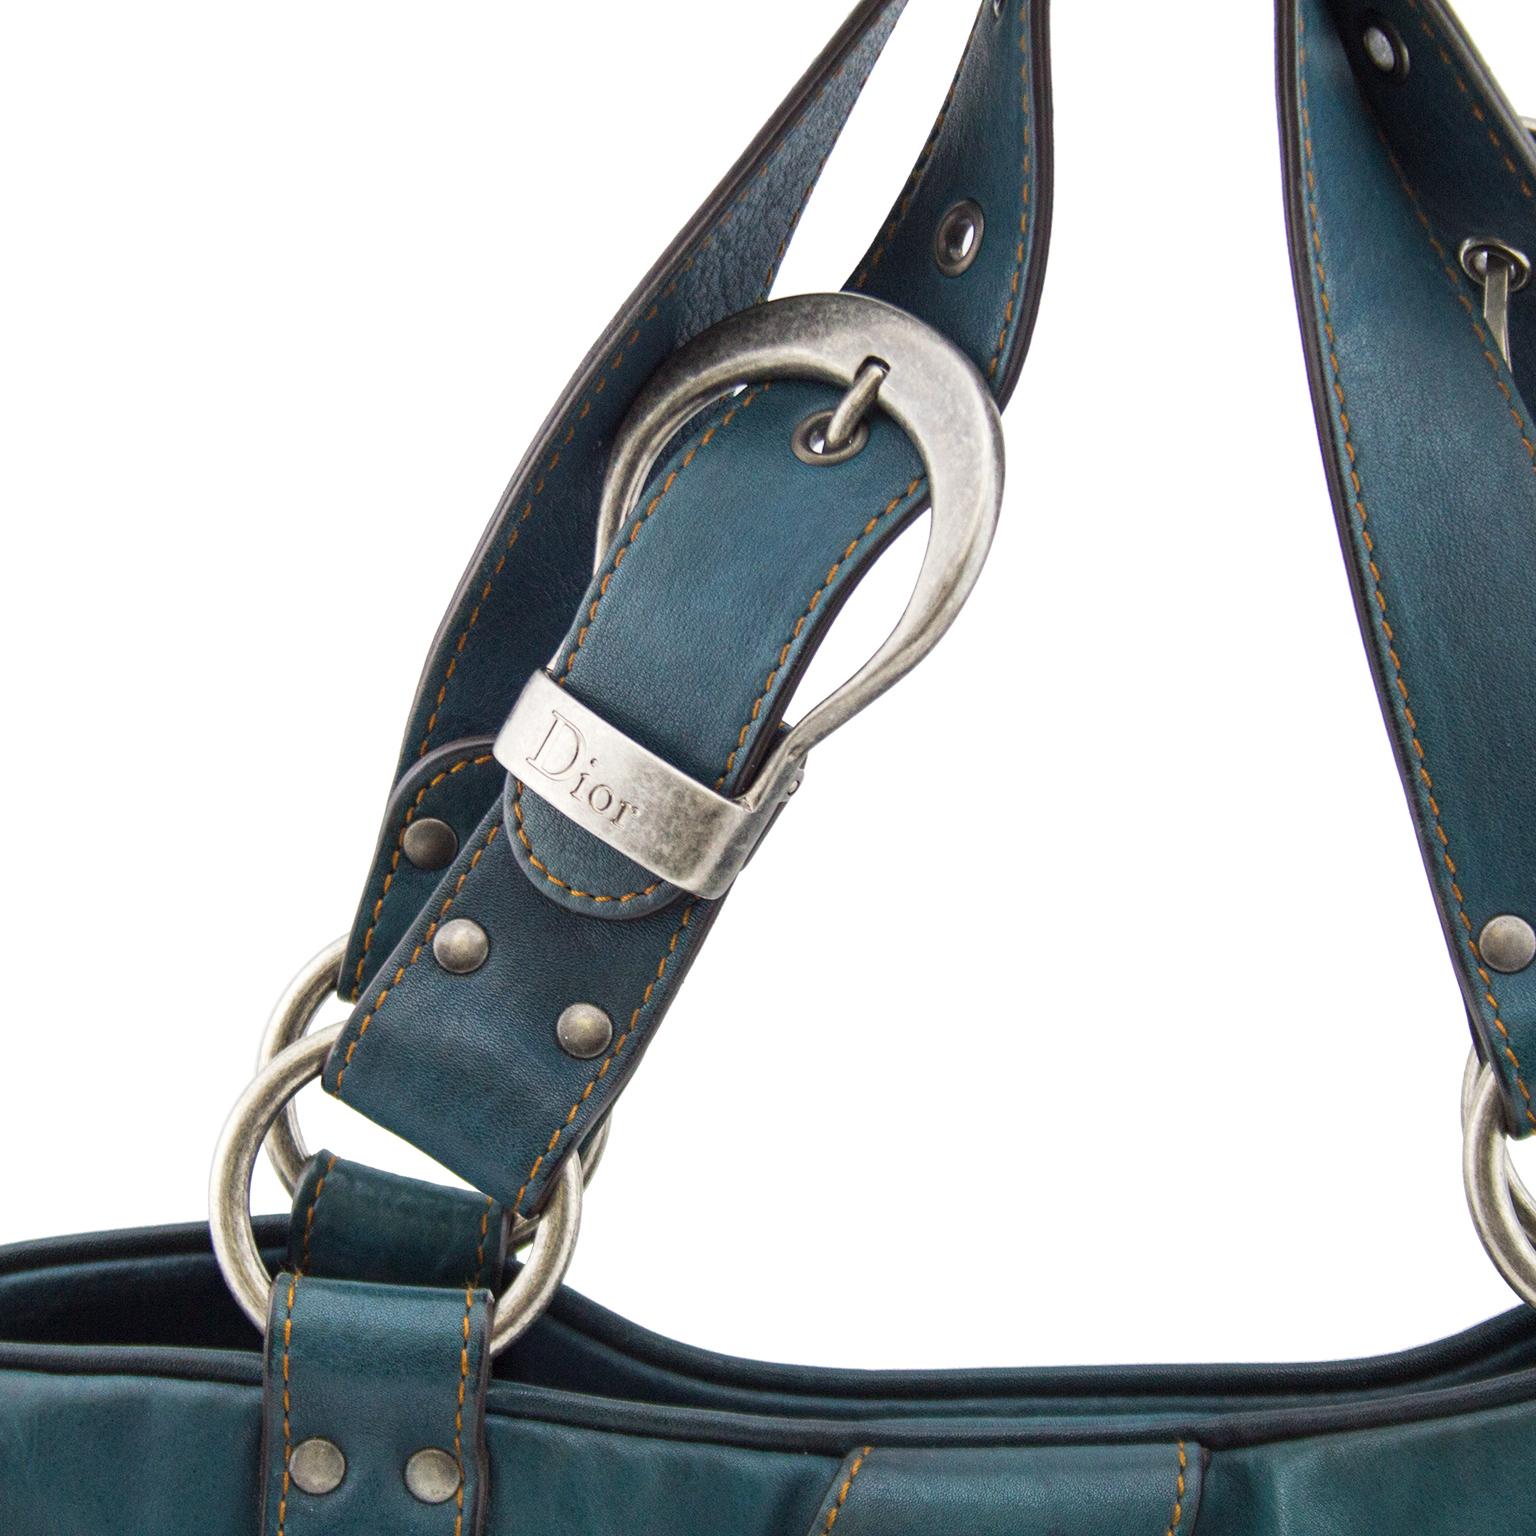 Women's S/S 2006 Dior Double Gaucho Teal Blue Leather Saddle bag